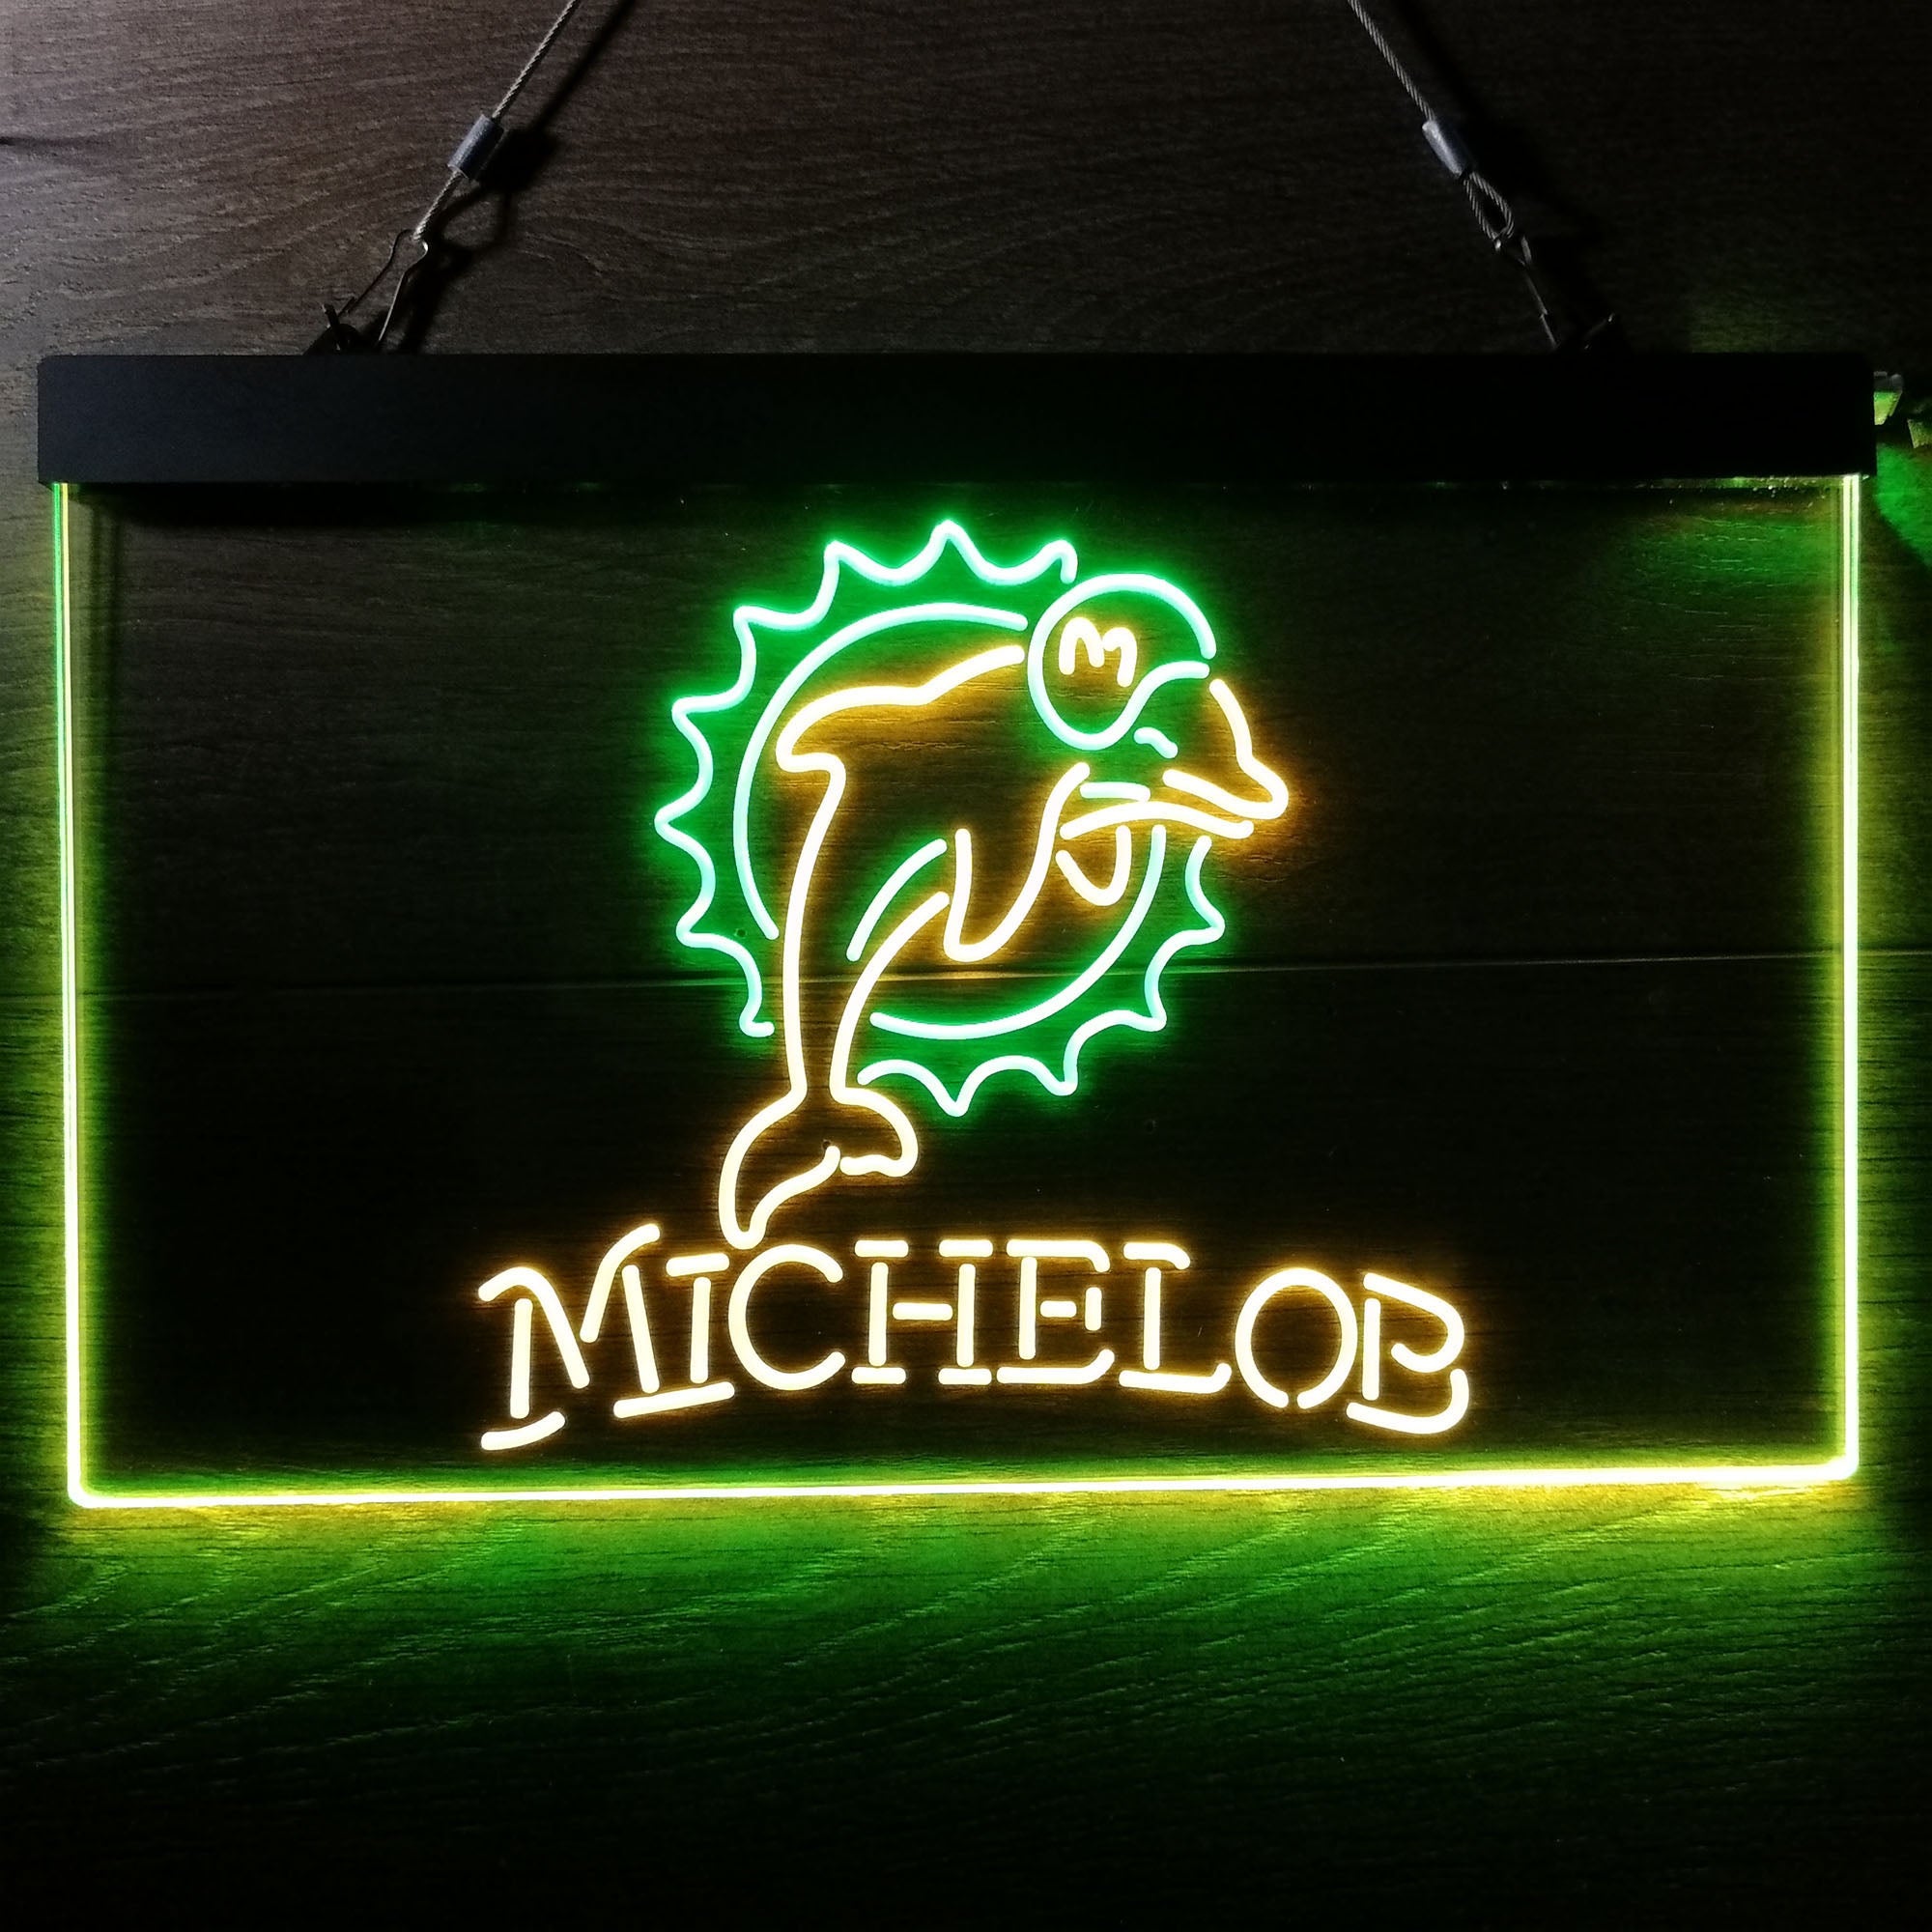 Michelob Bar Miami Dolphins Est. 1966 LED Neon Sign